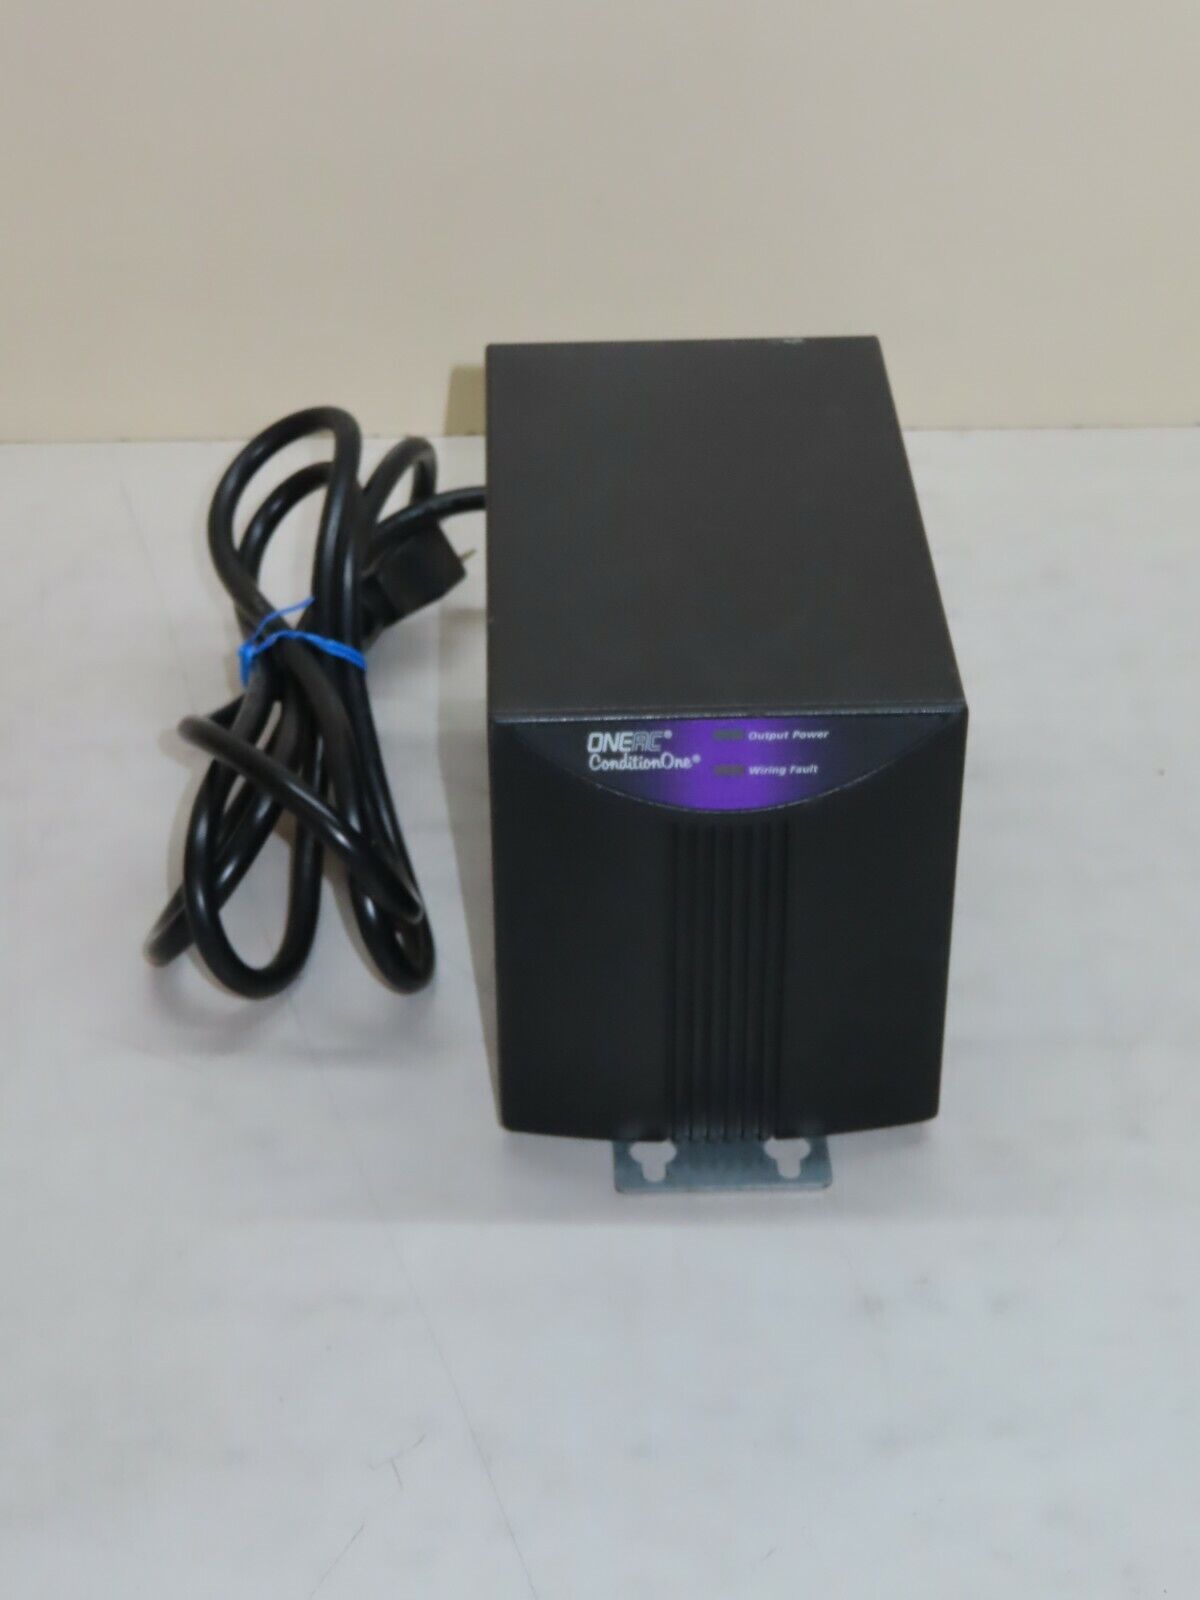 Oneac Pc360at S4sw 3 Amp 120v Power Conditioner 120v 3a 4 Outlet